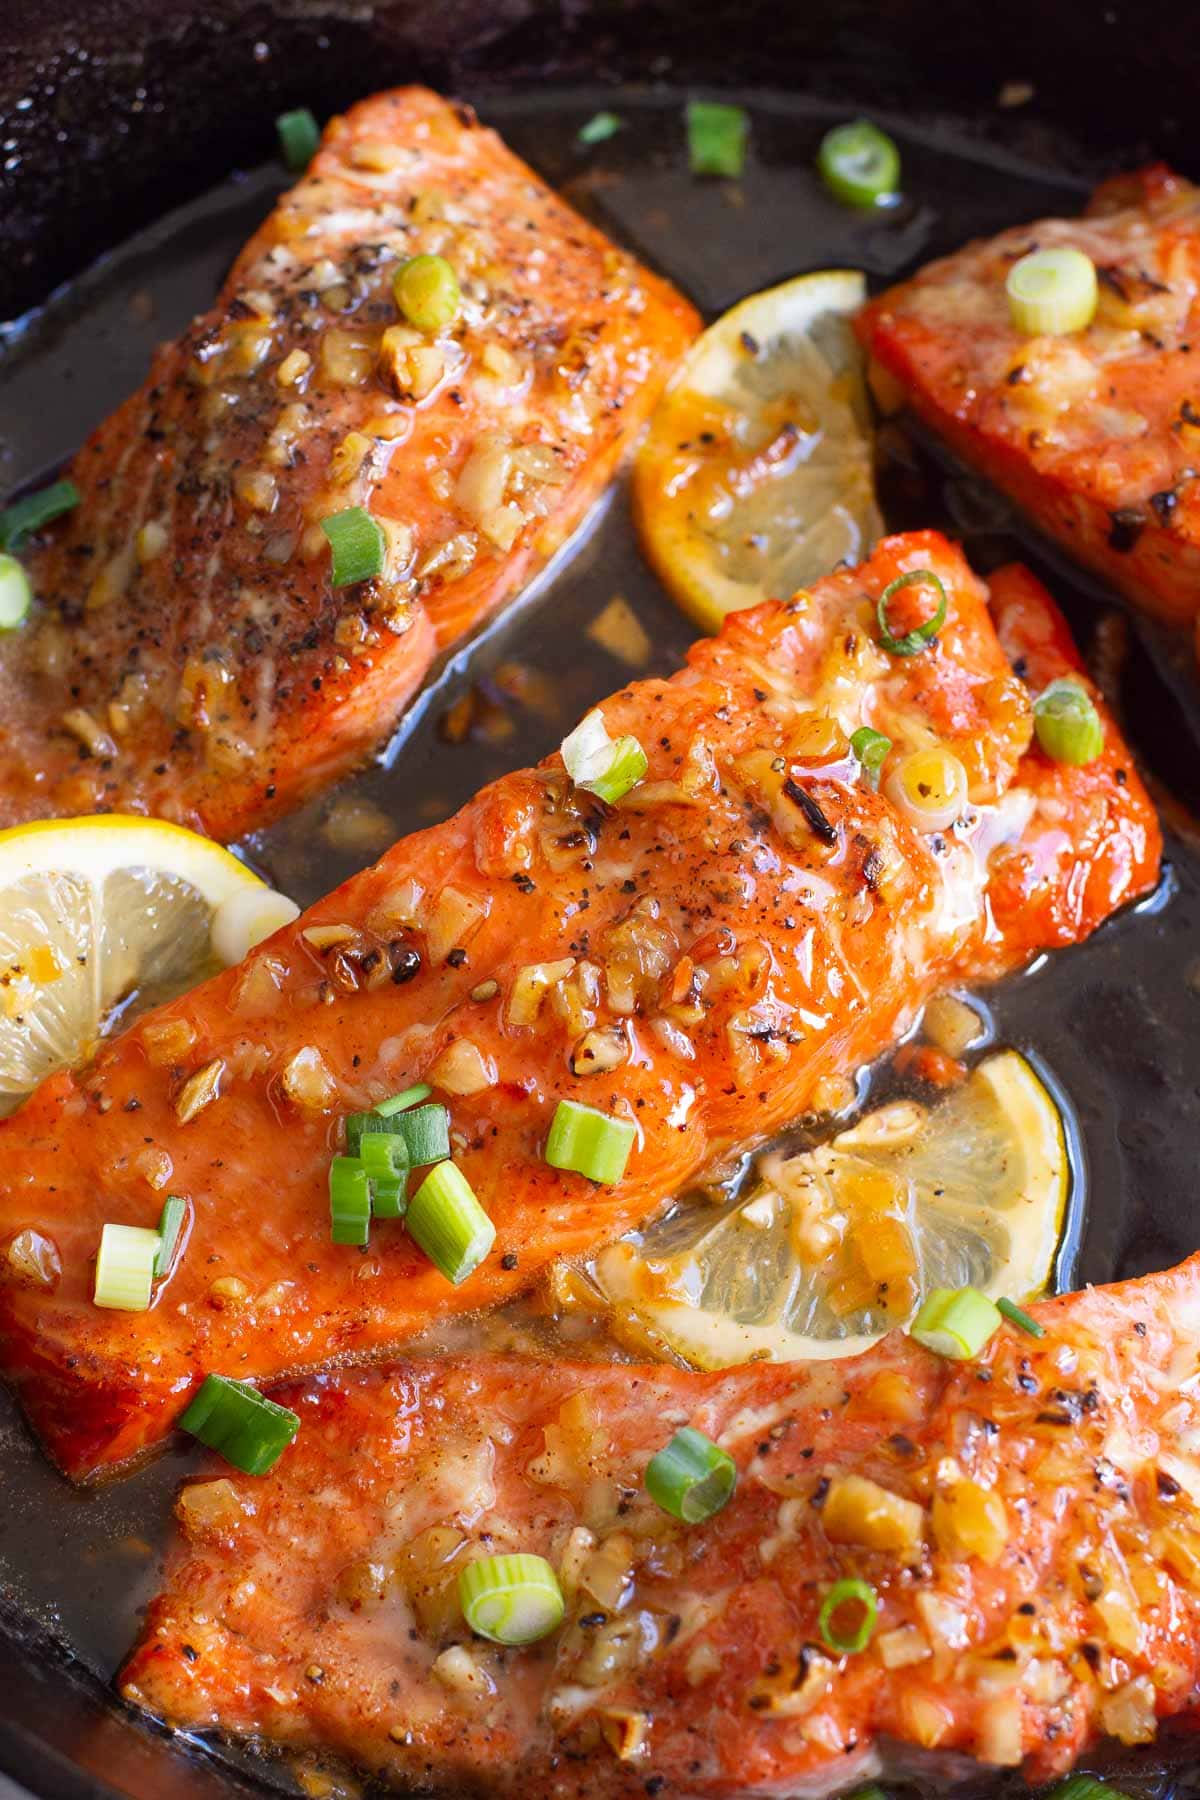 Honey garlic glazed salmon with green onion and lemon slices in cast iron skillet.